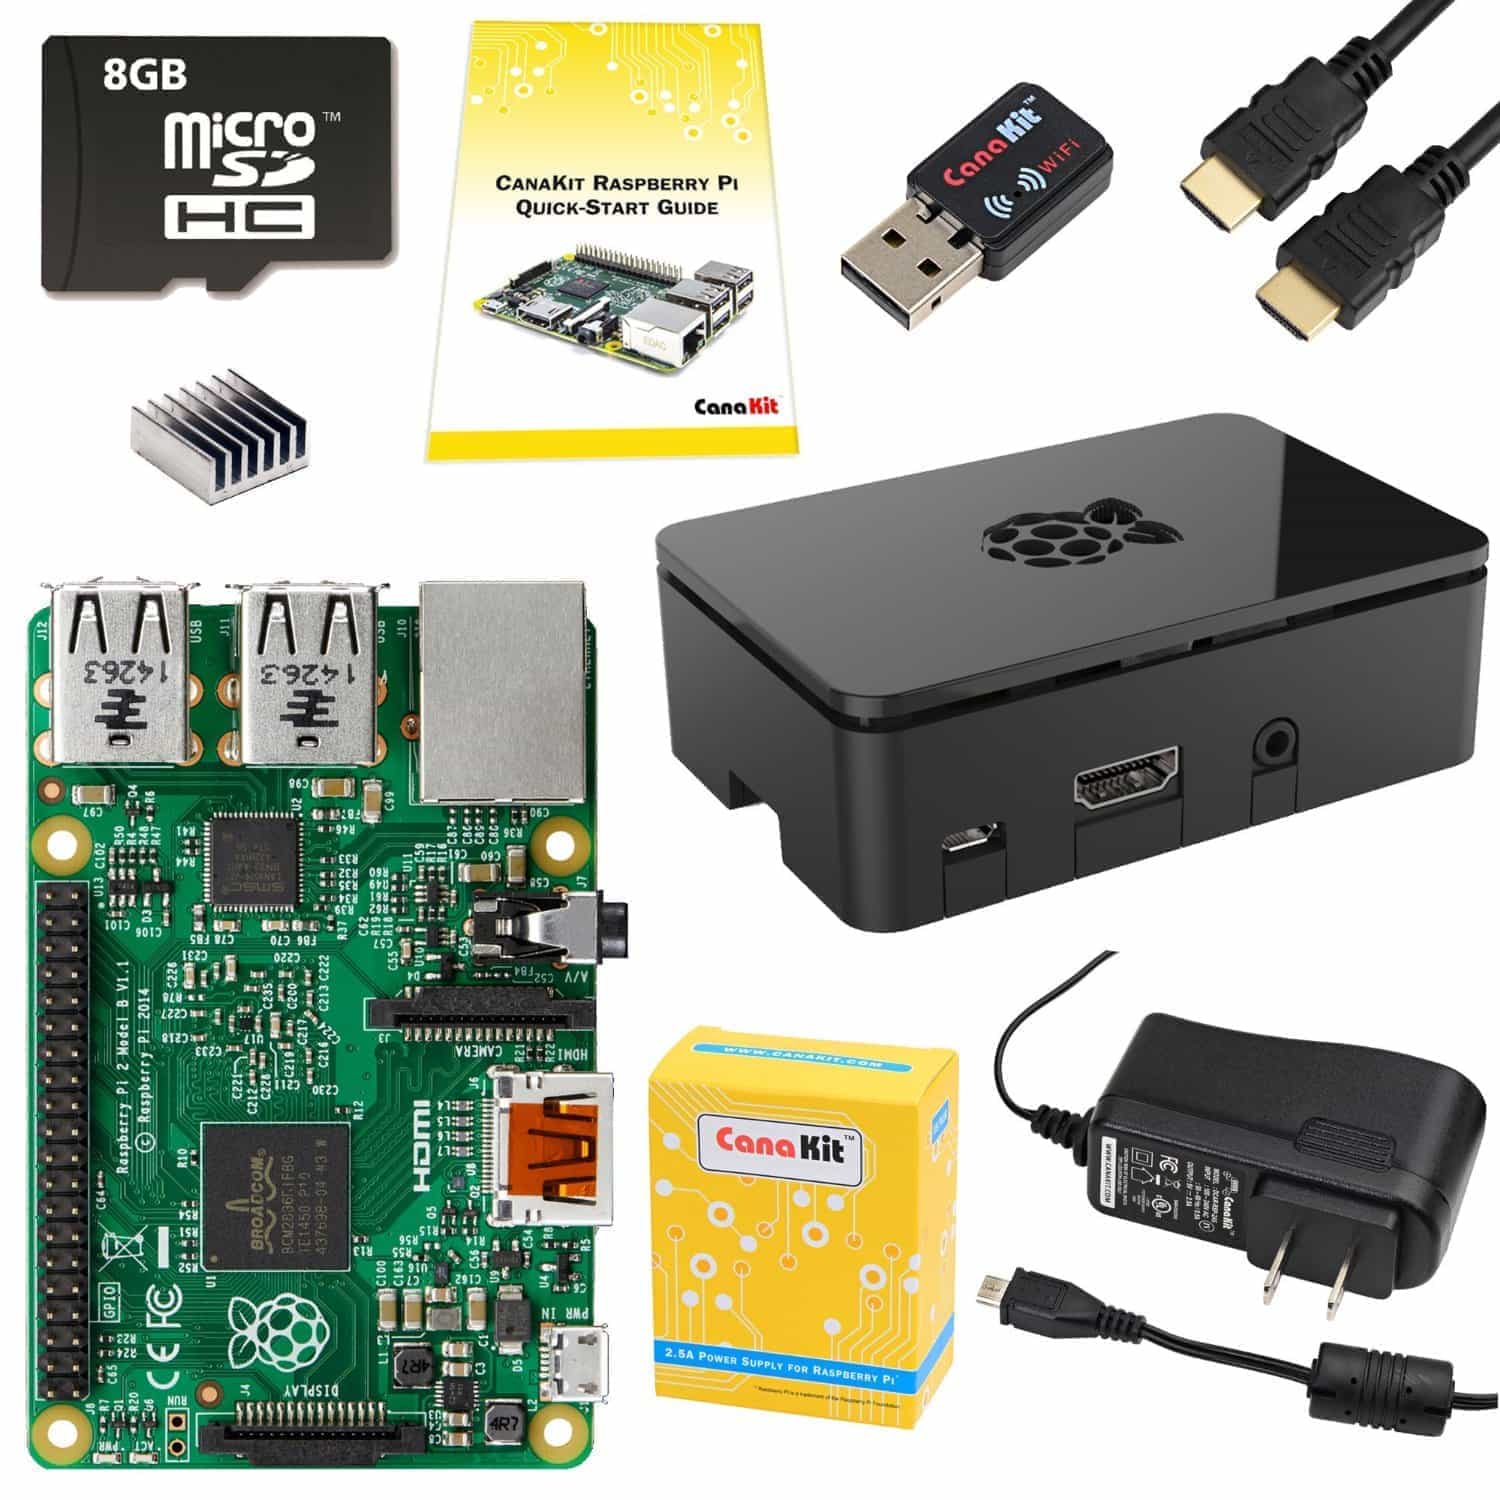 SignalK and services moved to Raspberry Pi B